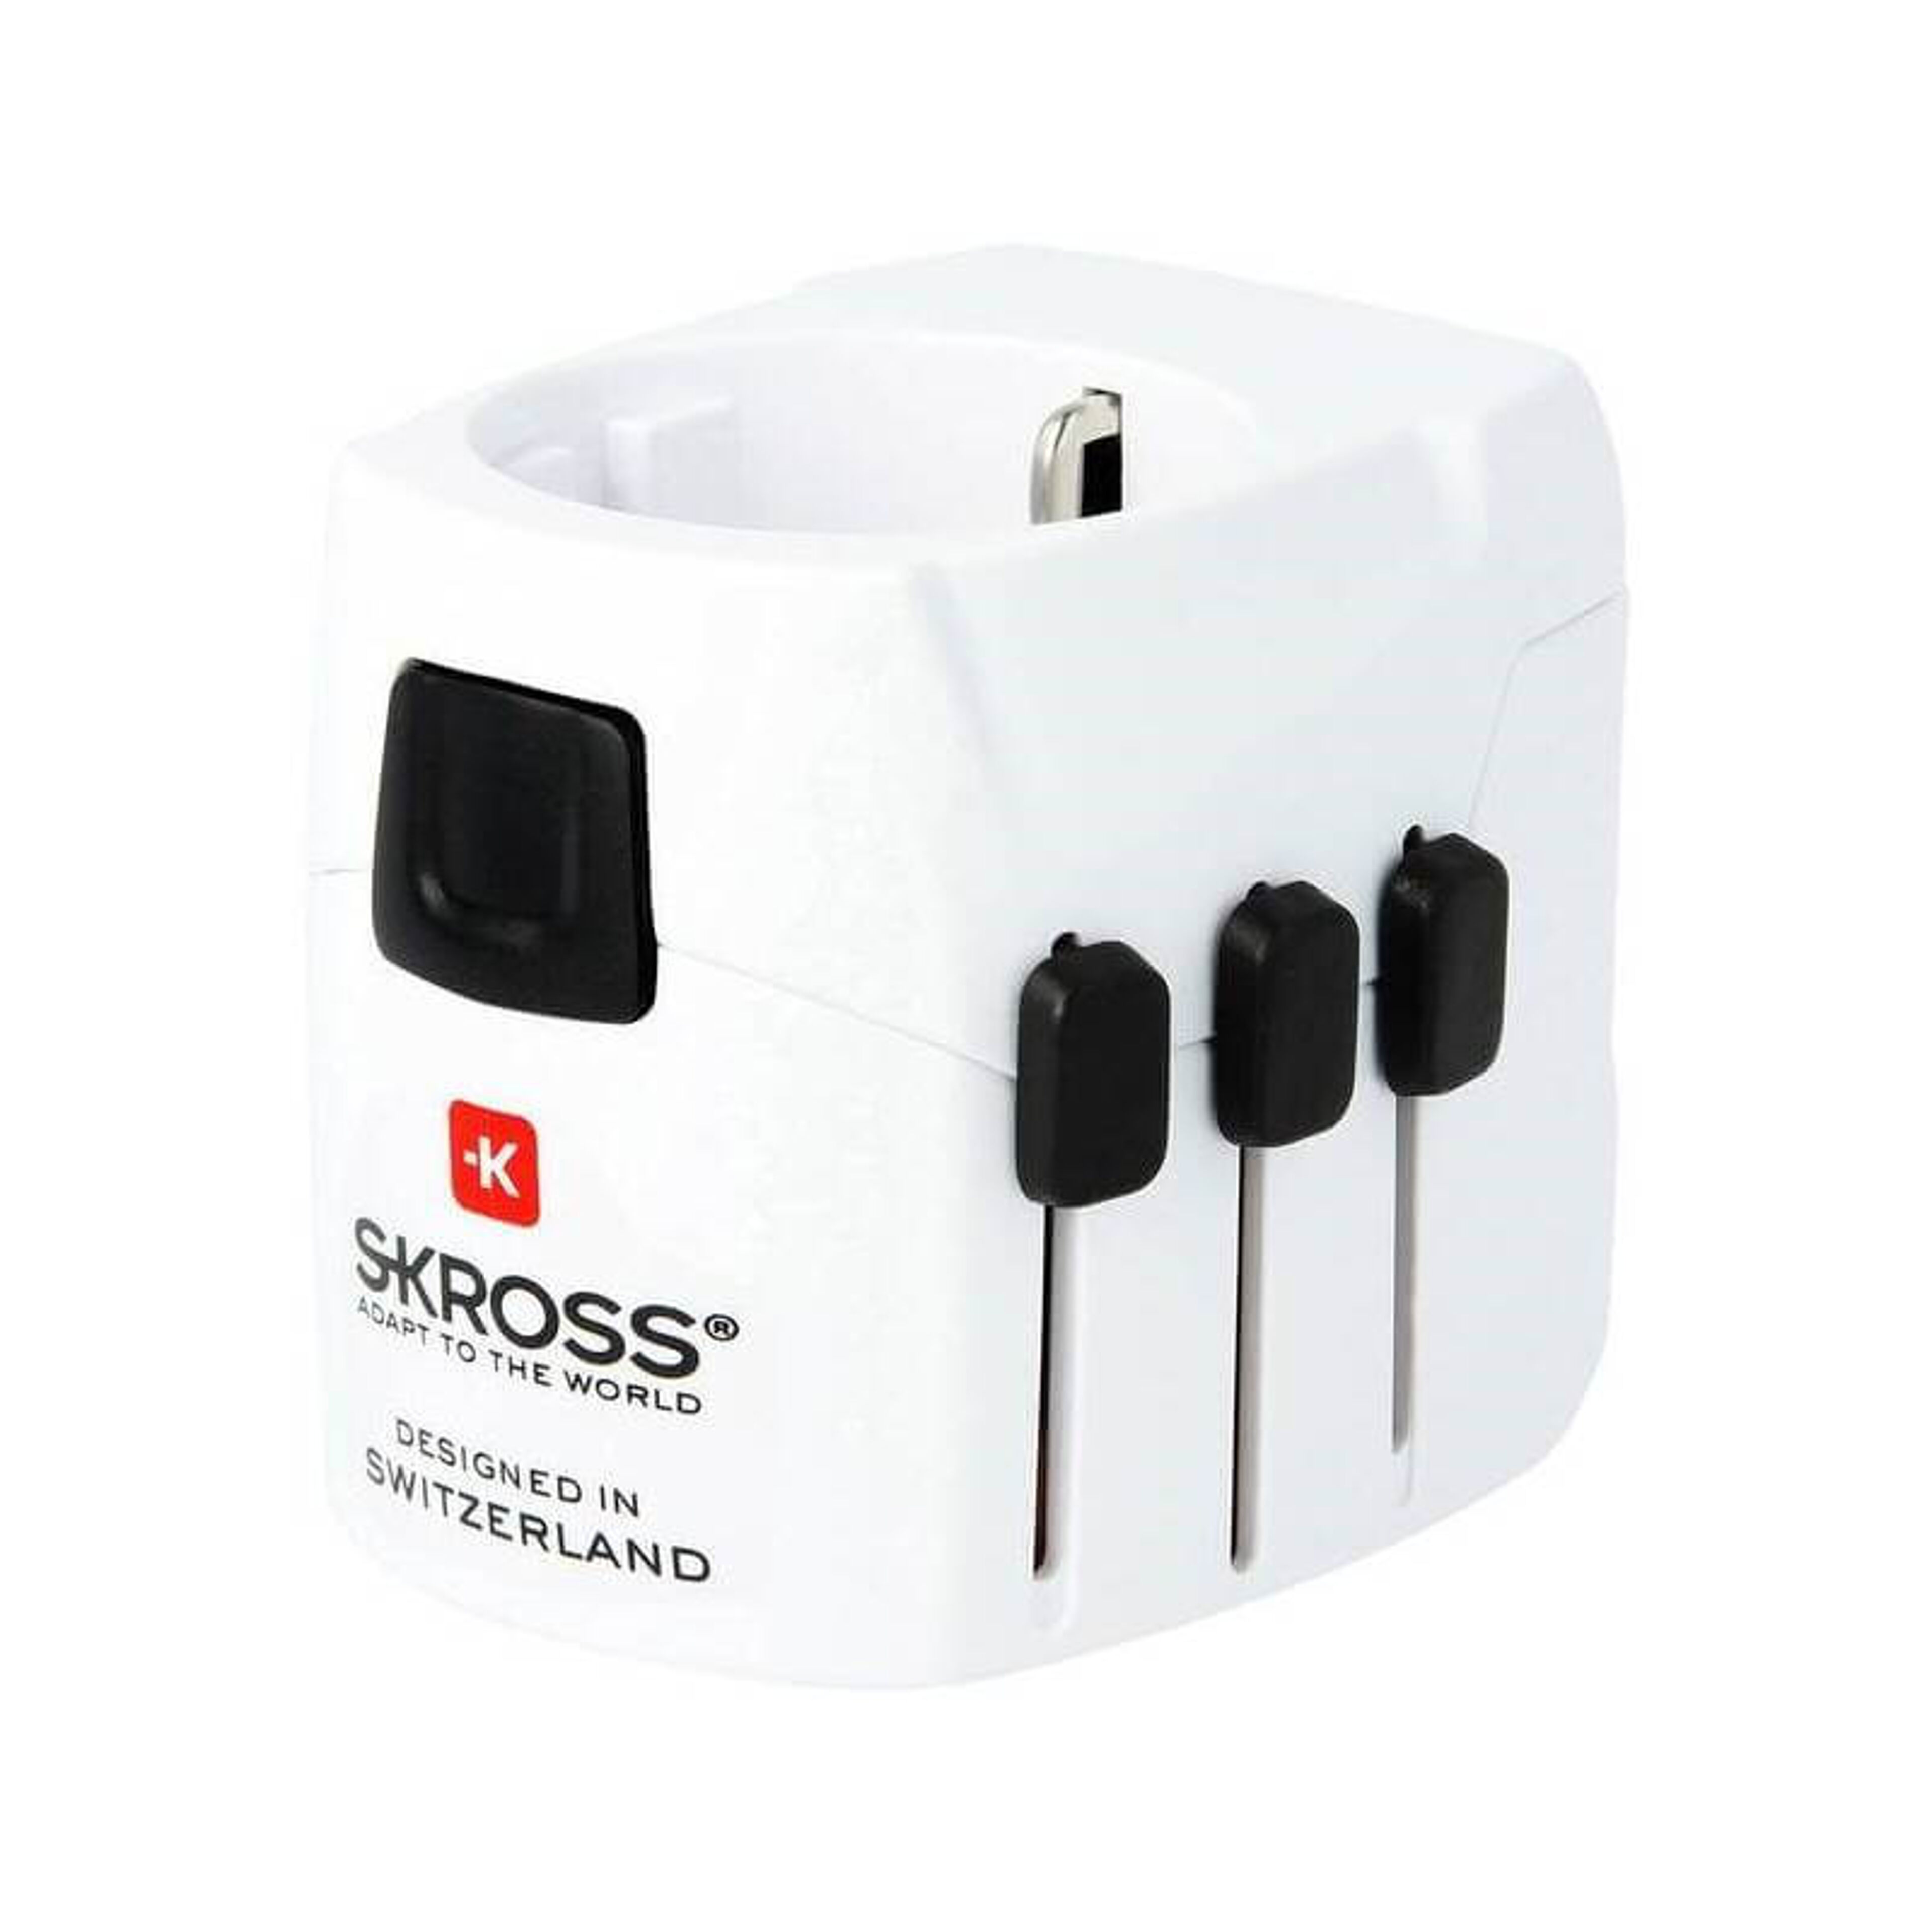 SKROSS travel adapter - Light USB, 6.3A max., incl. USB charging, grounded, UK+US+Australia/China